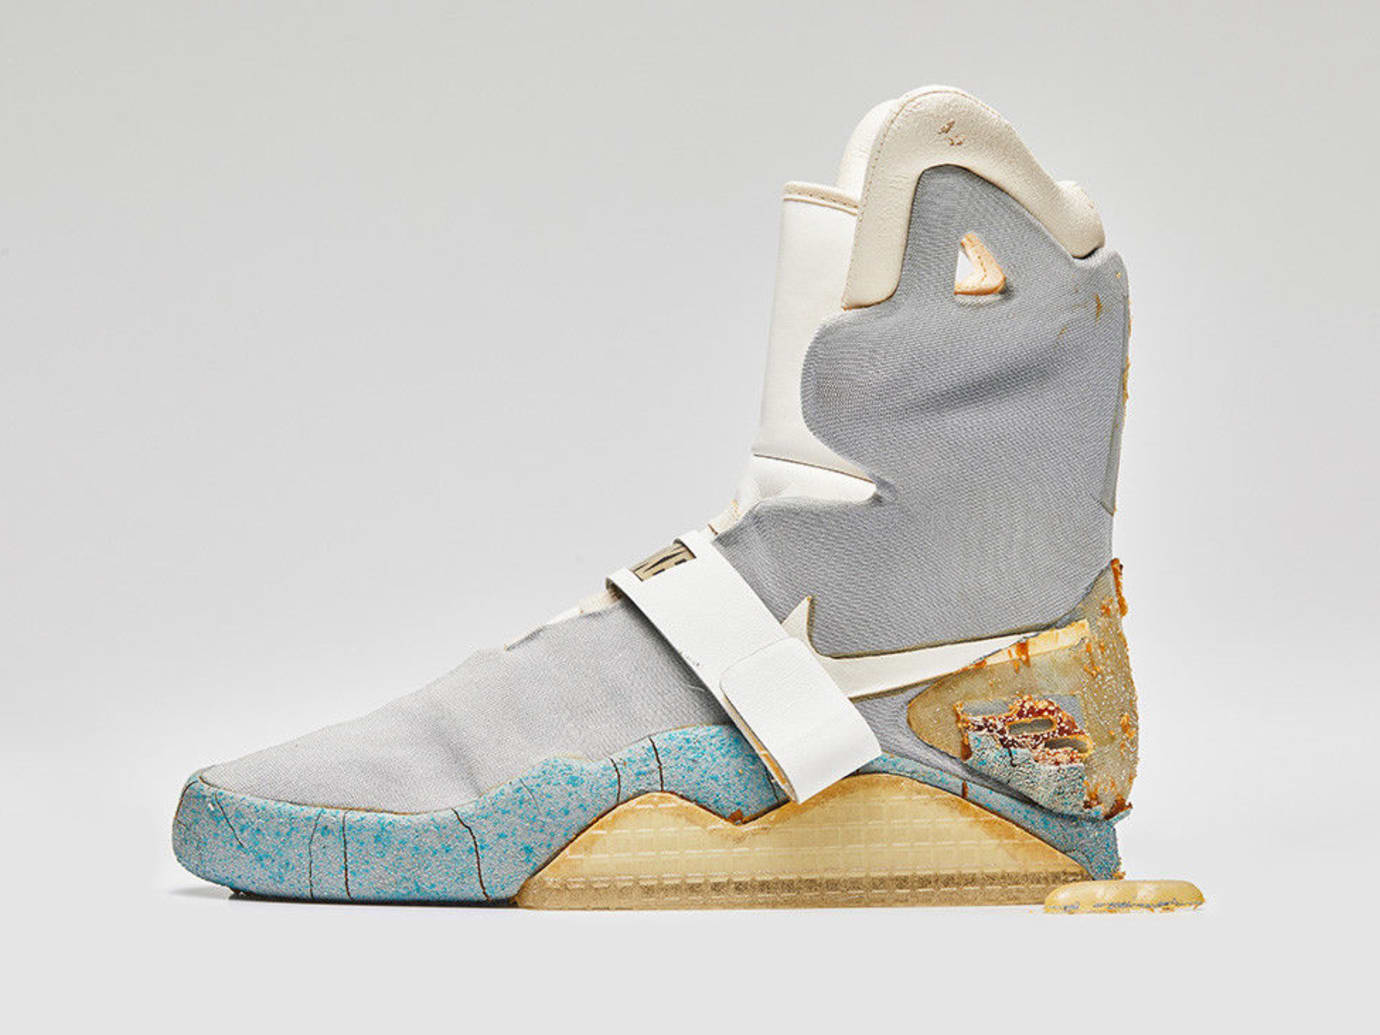 Nike Mag Sneaker From Sells for Over $90,000 at Auction | Sole